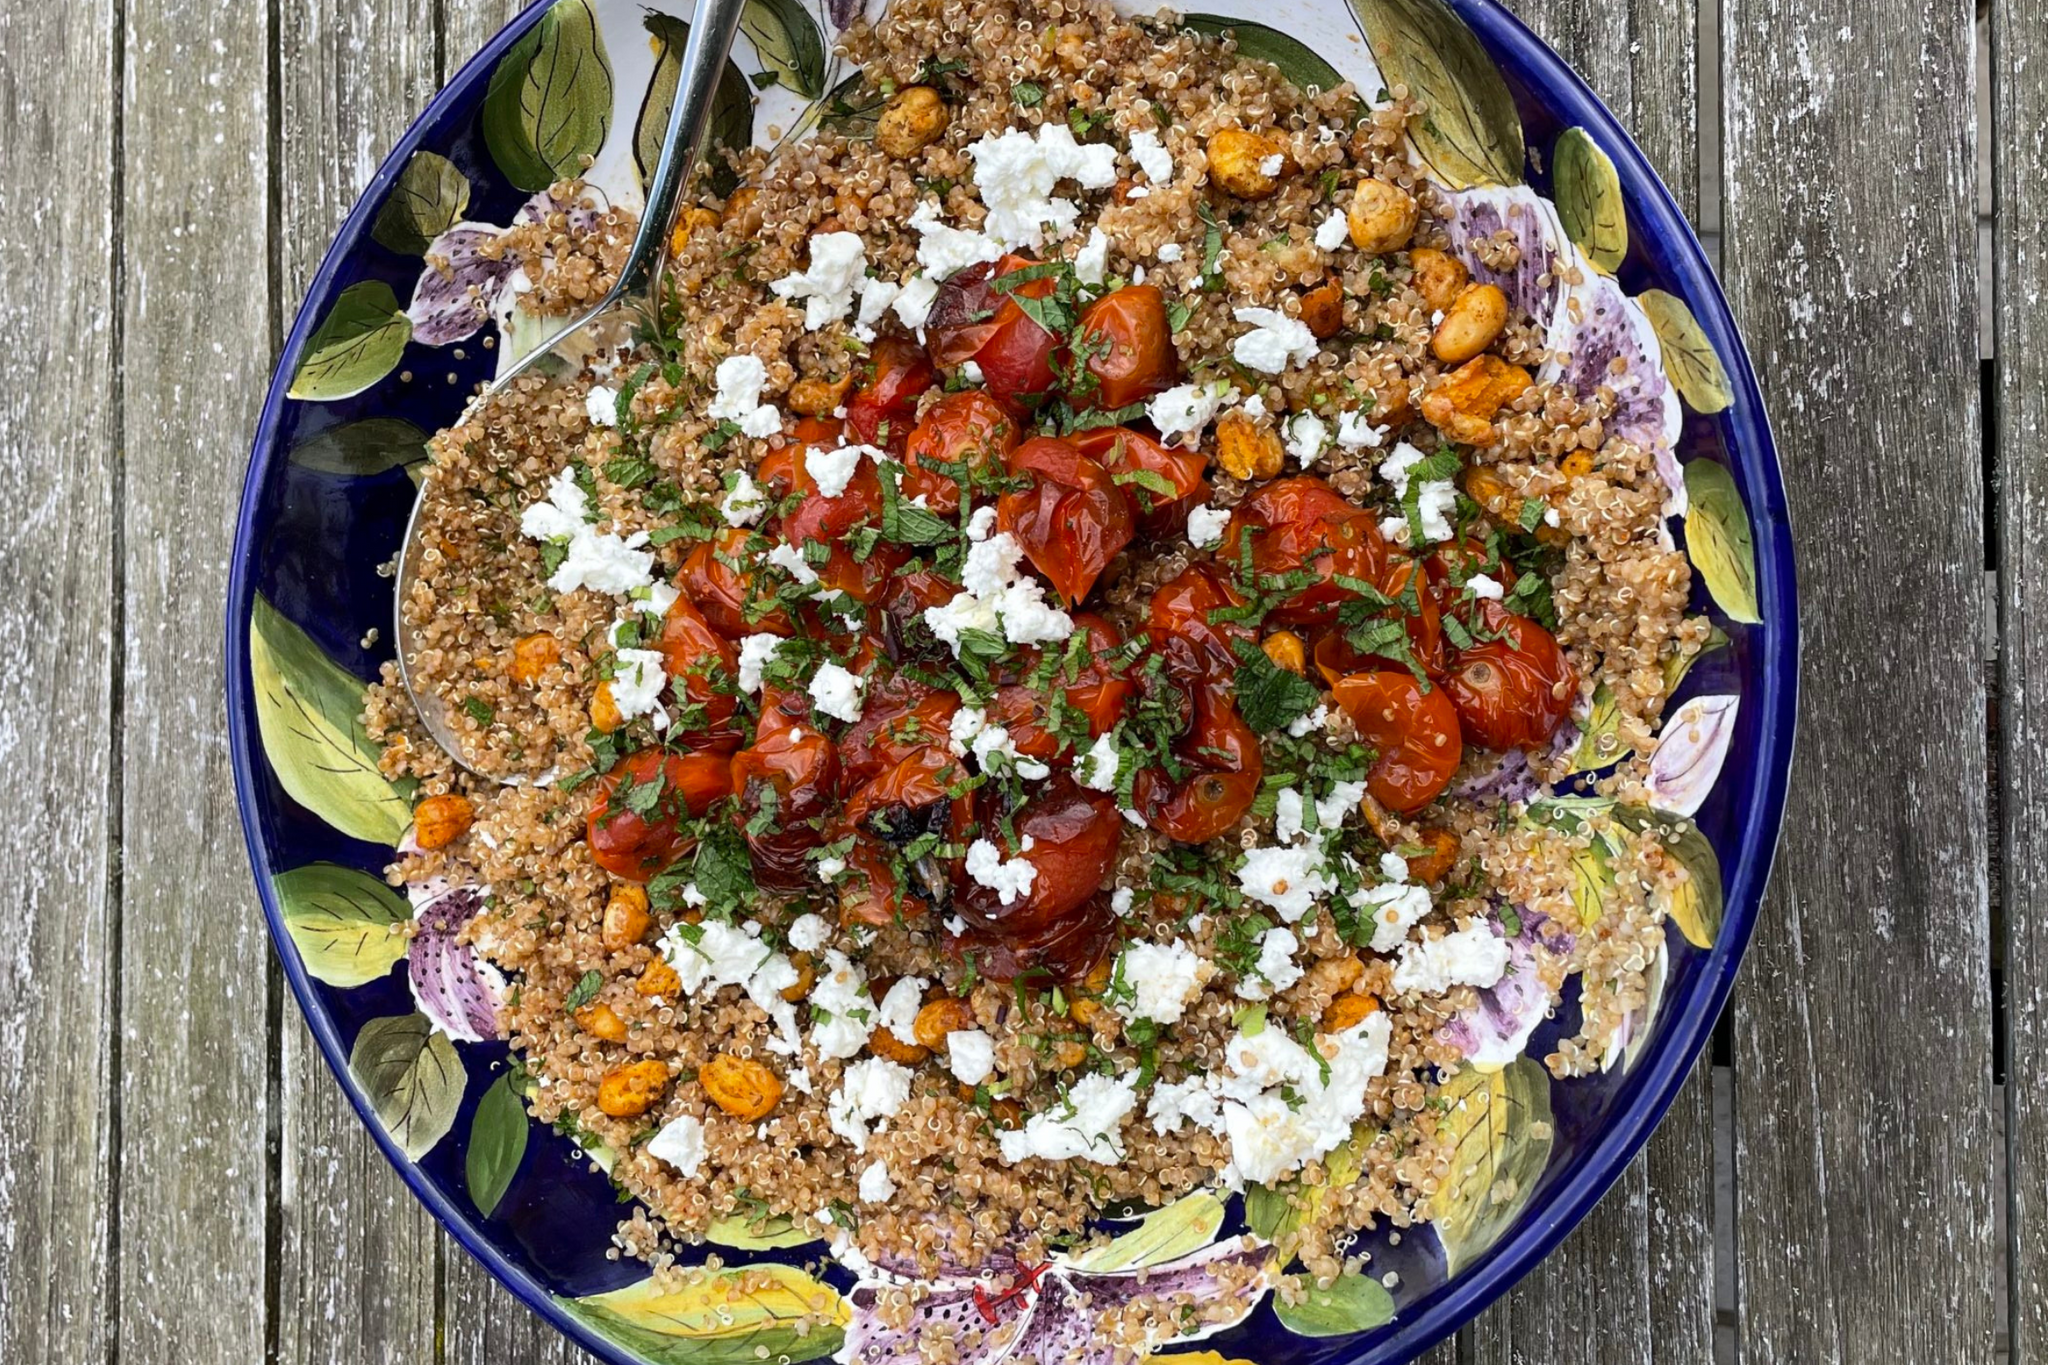 Smoked Quinoa with Roasted Cherry Tomatoes & Carlin Peas